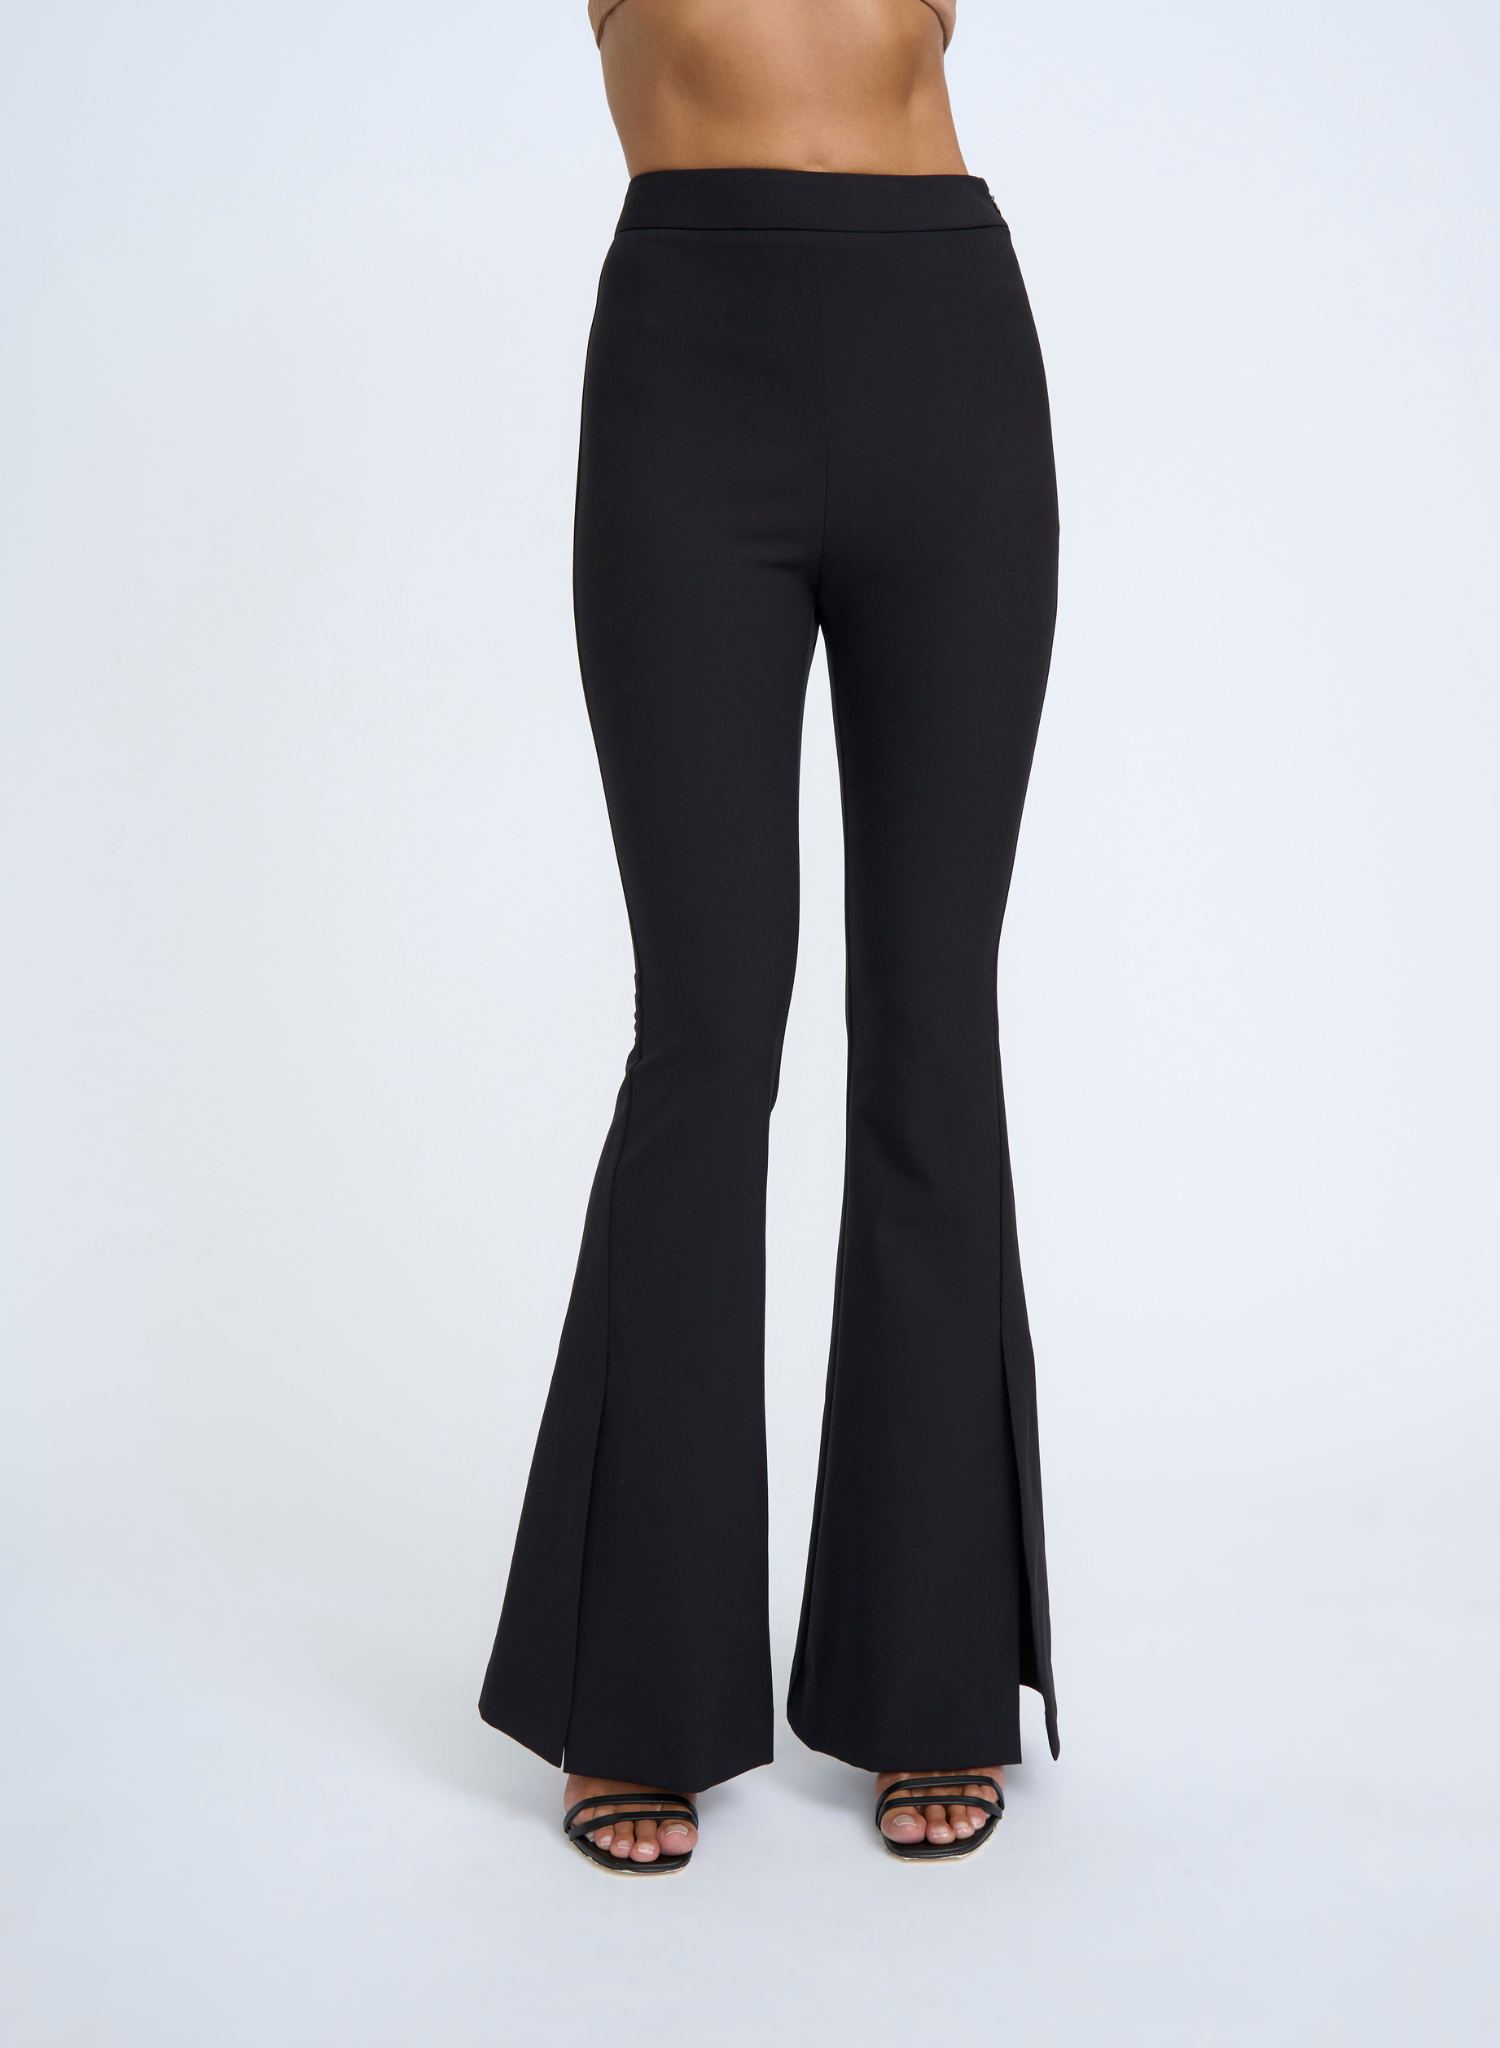 The Sliced Flare Knit Pant features a dramatic flared front split and is form fitting while flattering to the figure. The thick waistband has been designed to provide both comfort and support for all day wear. From your staple heels to sneakers, this pant is versatile and can be dressed up or down.